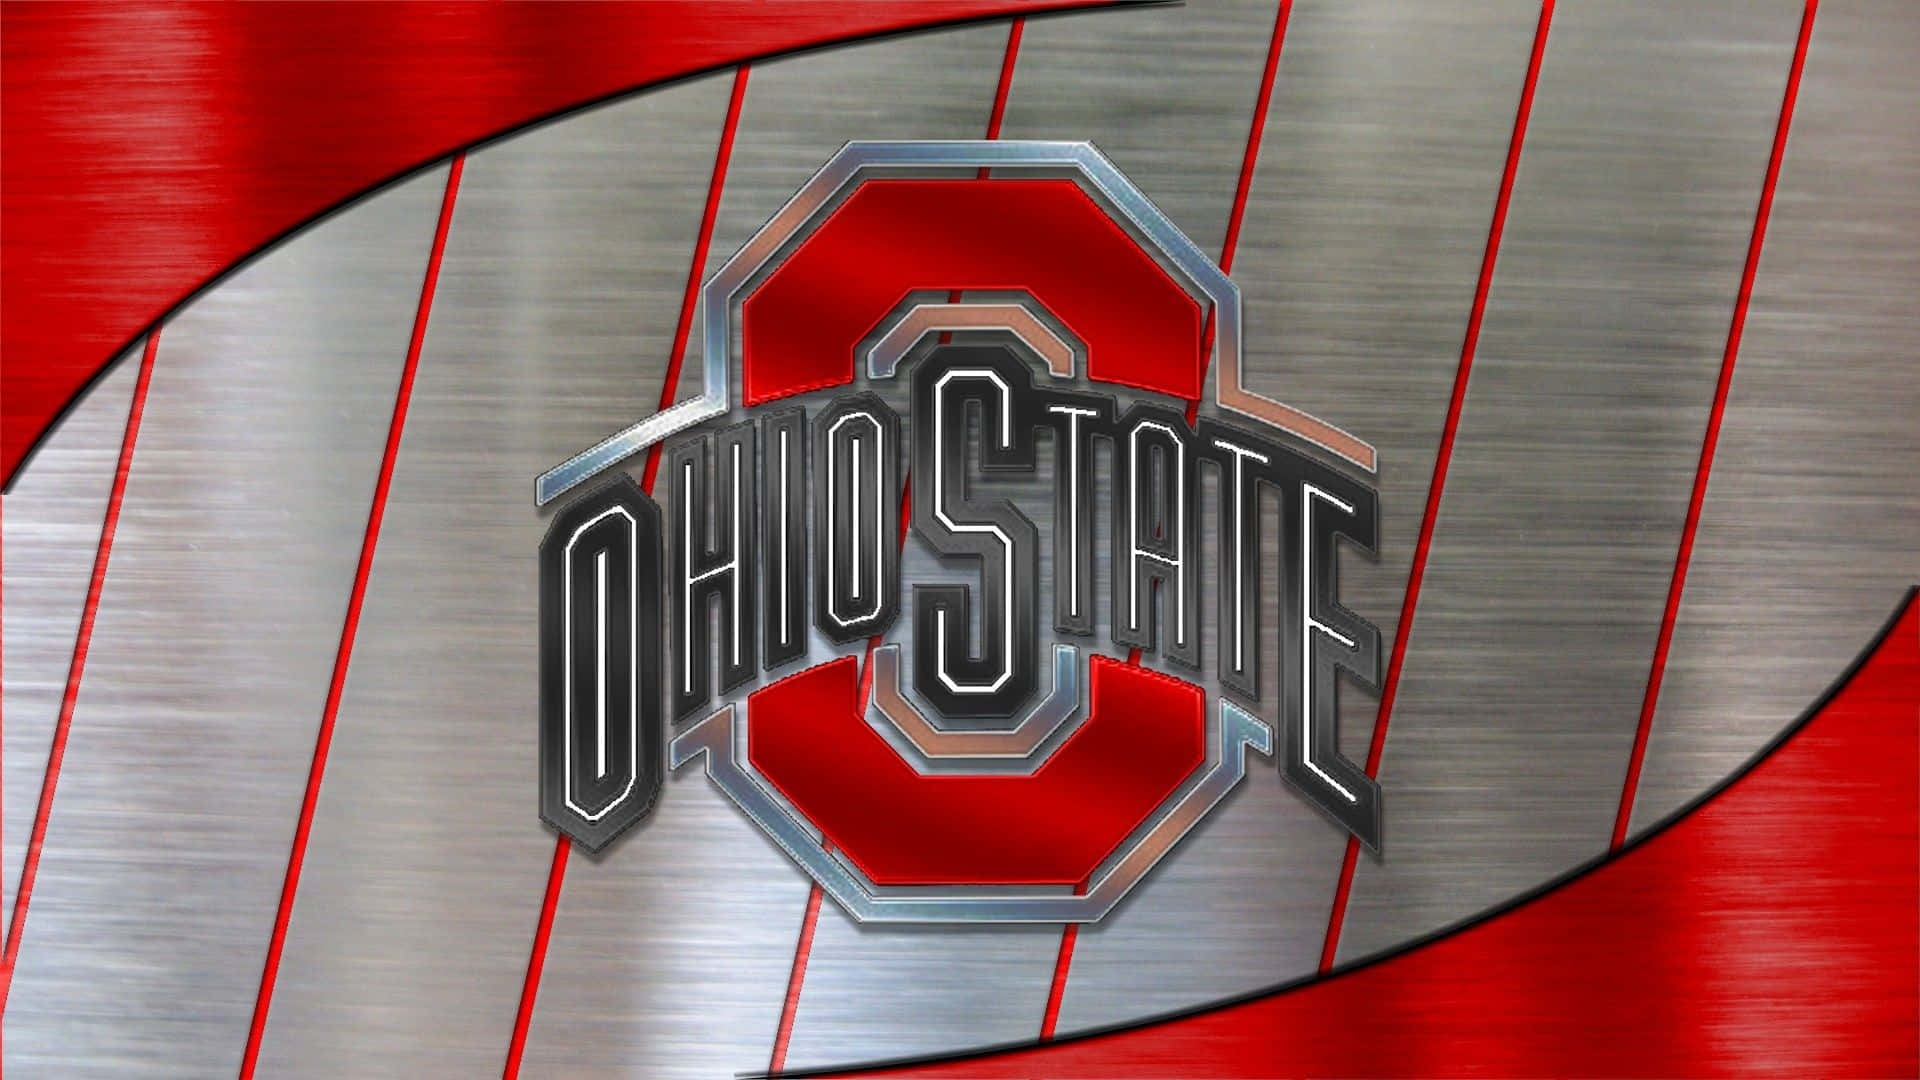 Support Ohio State with Cool Wallpaper Wallpaper